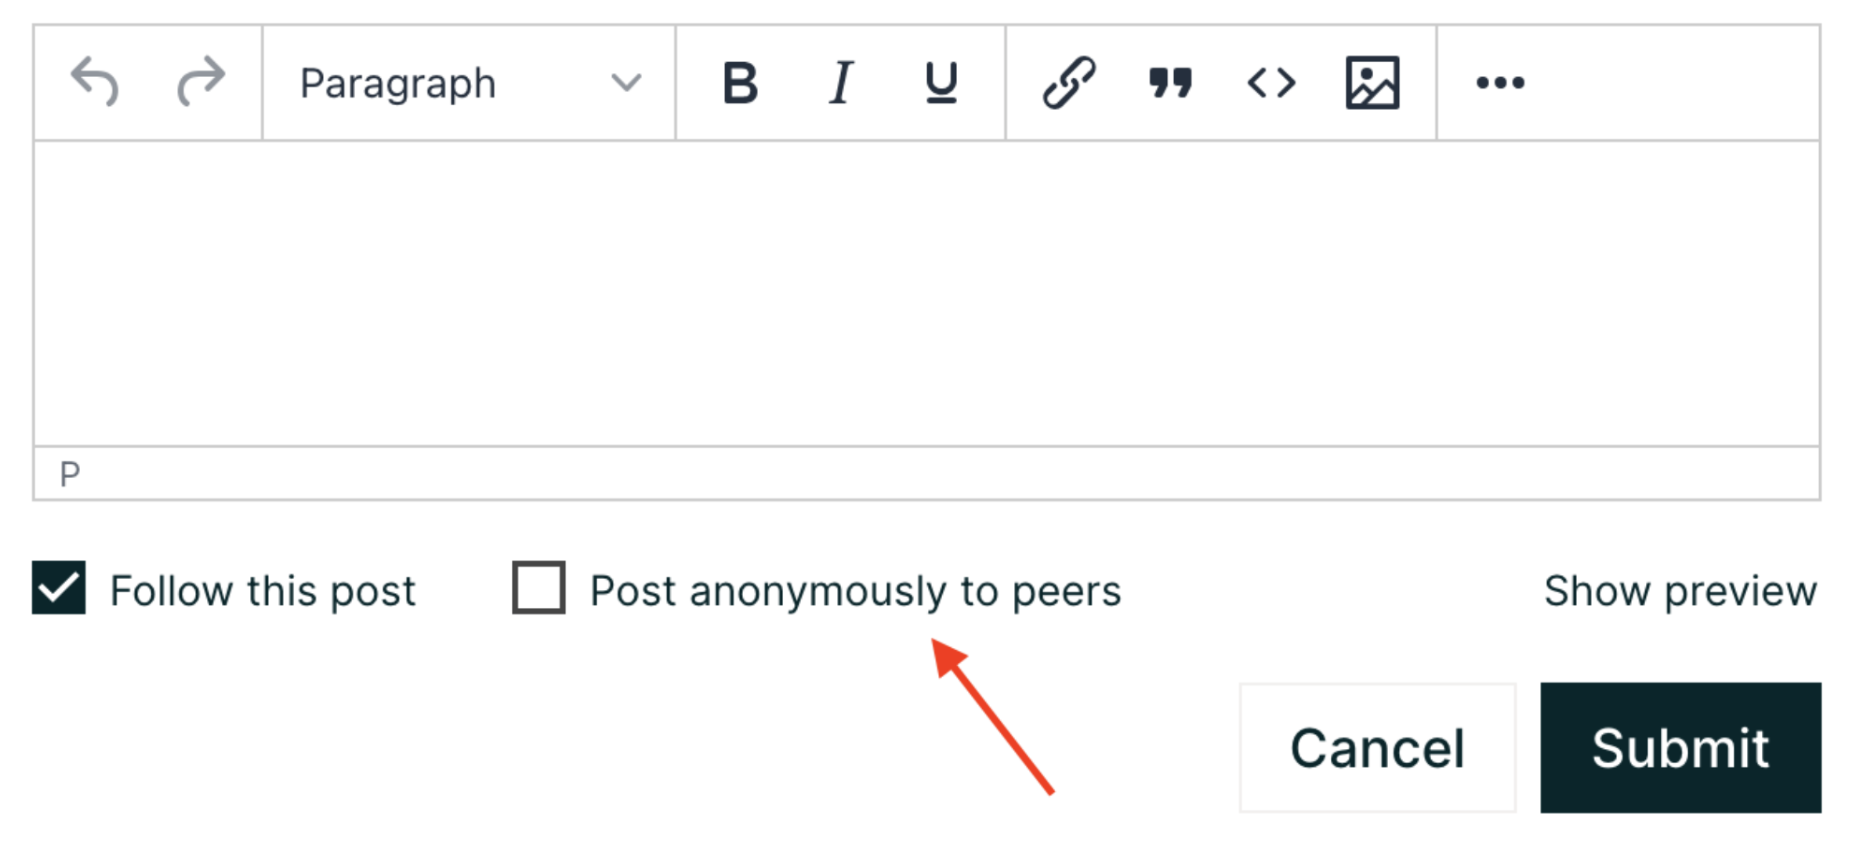 Options for anonymous posting while creating a post.